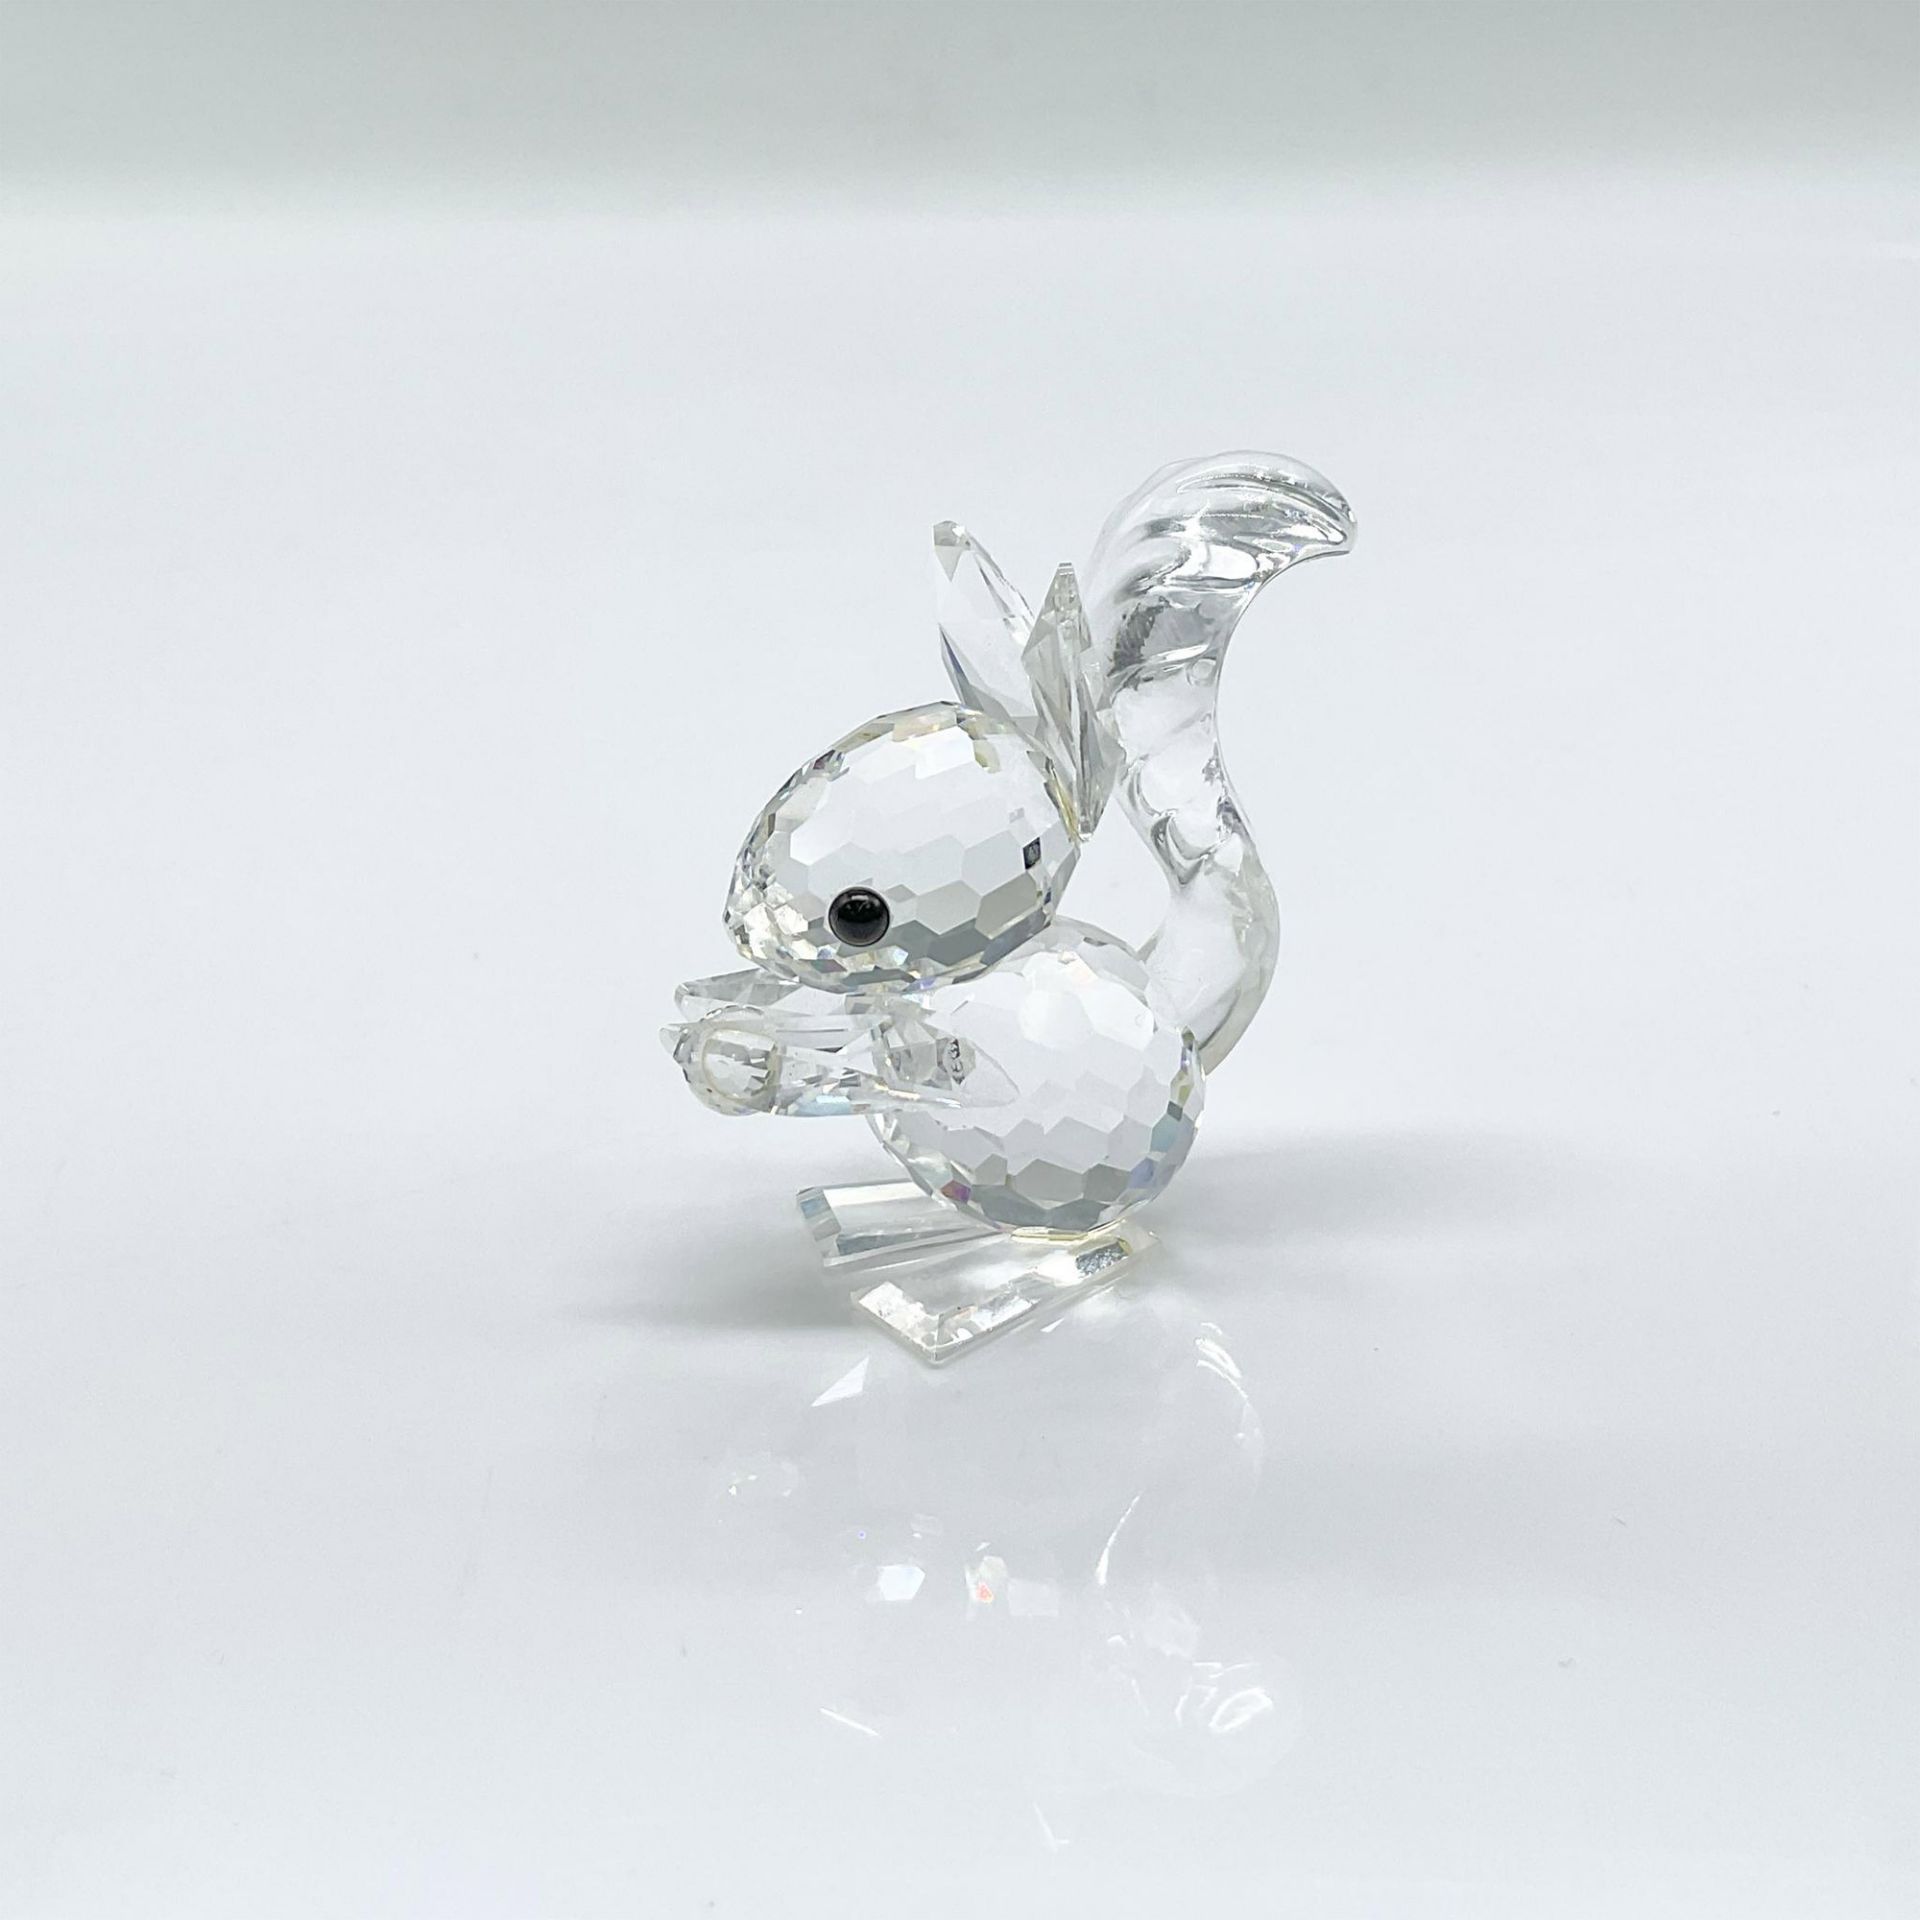 Swarovski Silver Crystal Figurine, Squirrel With Long Ears - Image 2 of 4